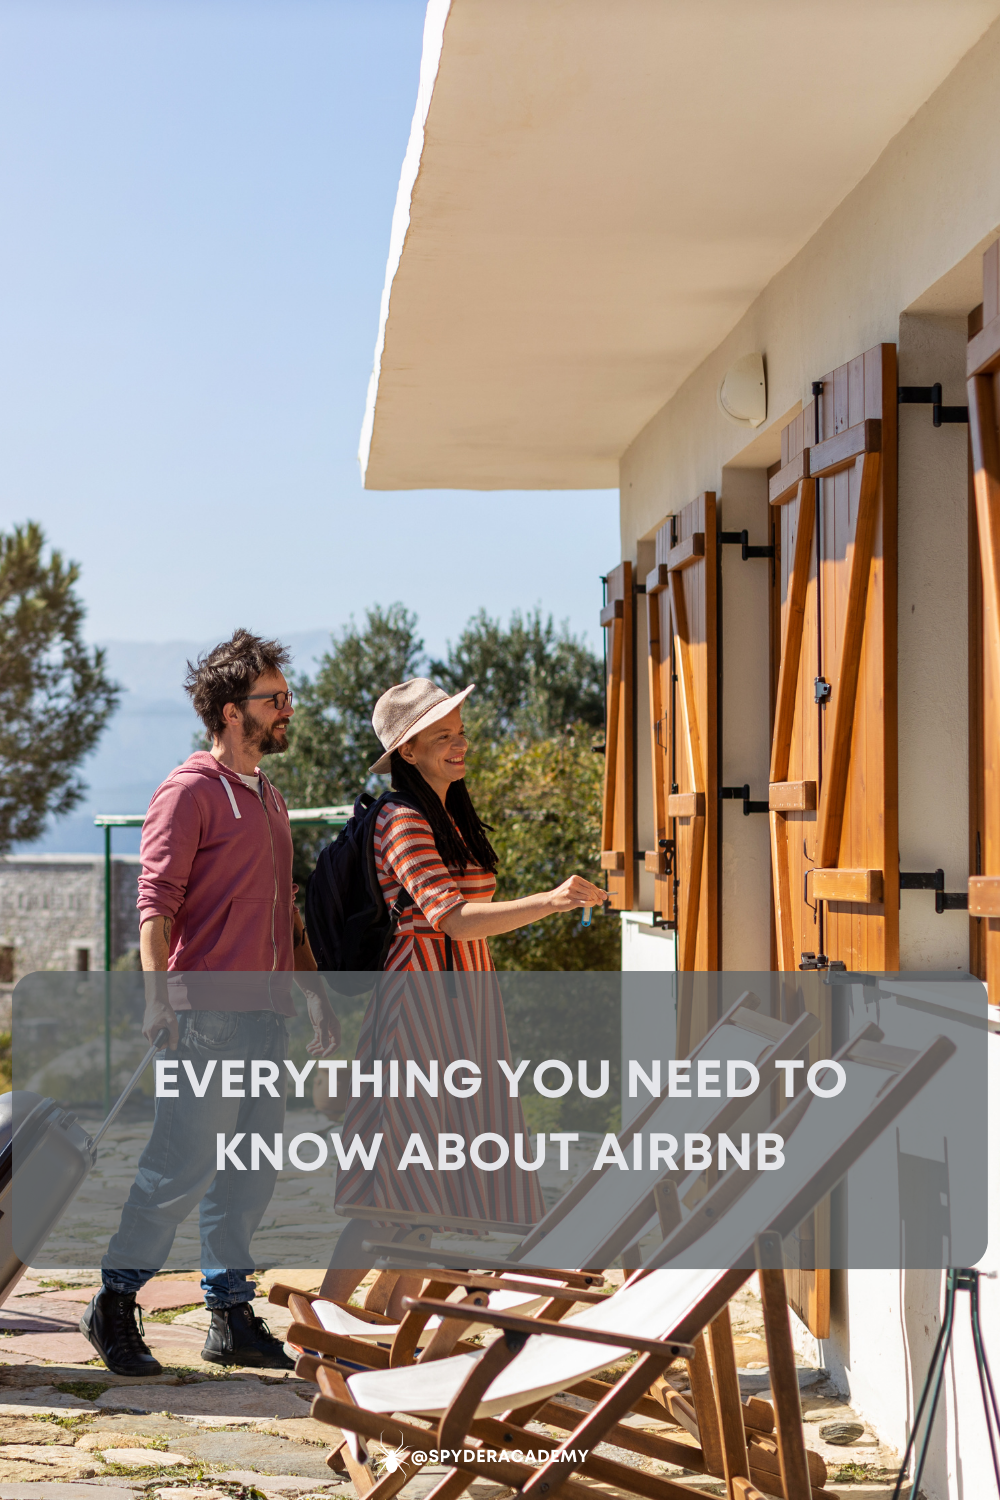 Dive into our comprehensive analysis of ABNB stock, exploring Airbnb's market trends, financial health, and investment potential. Understand the risks and opportunities in investing in one of the most innovative companies in the travel sector.